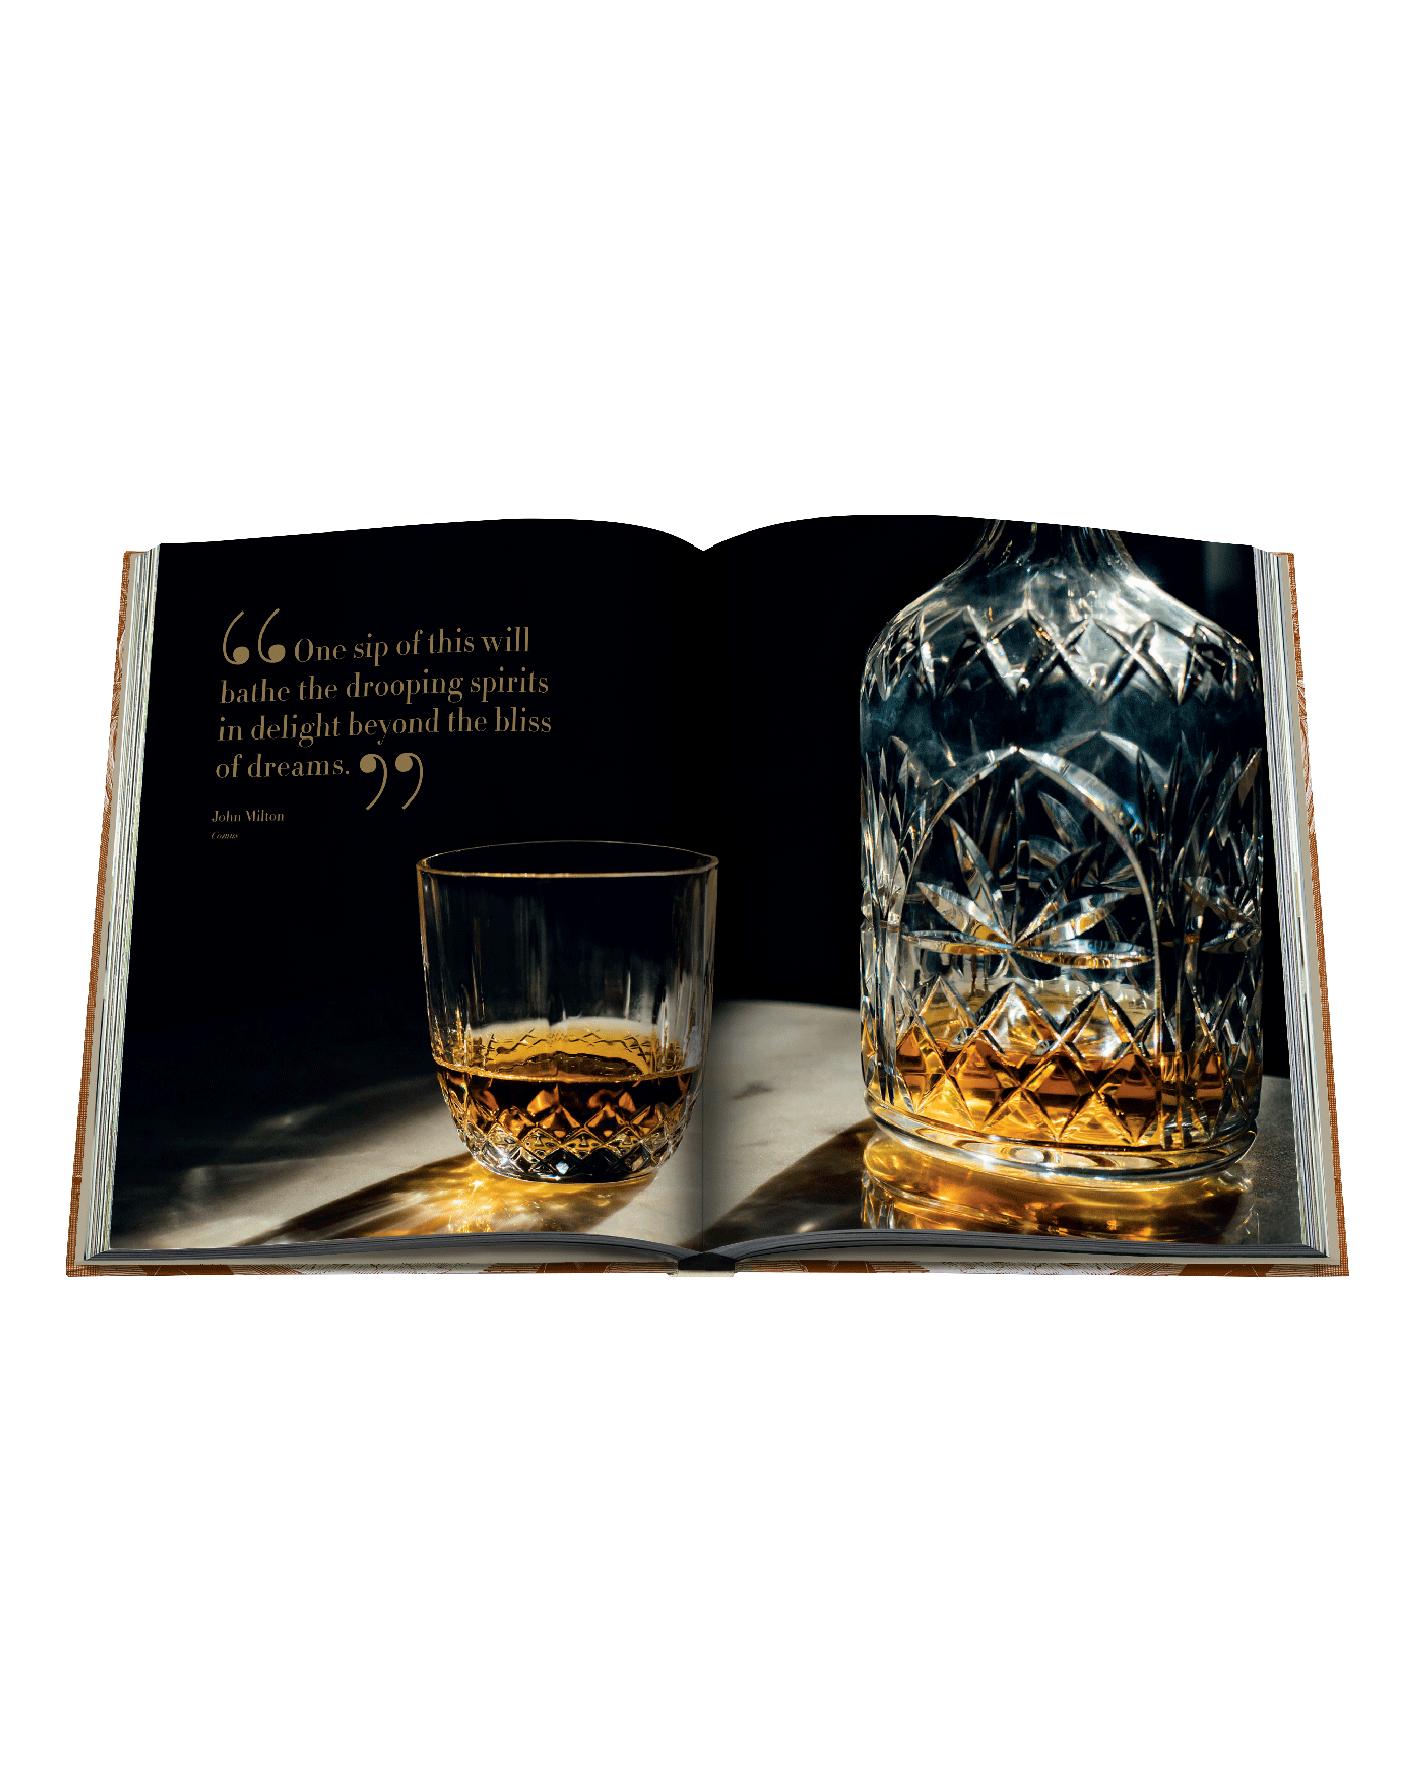 libro assouline the impossible collection of whiskey